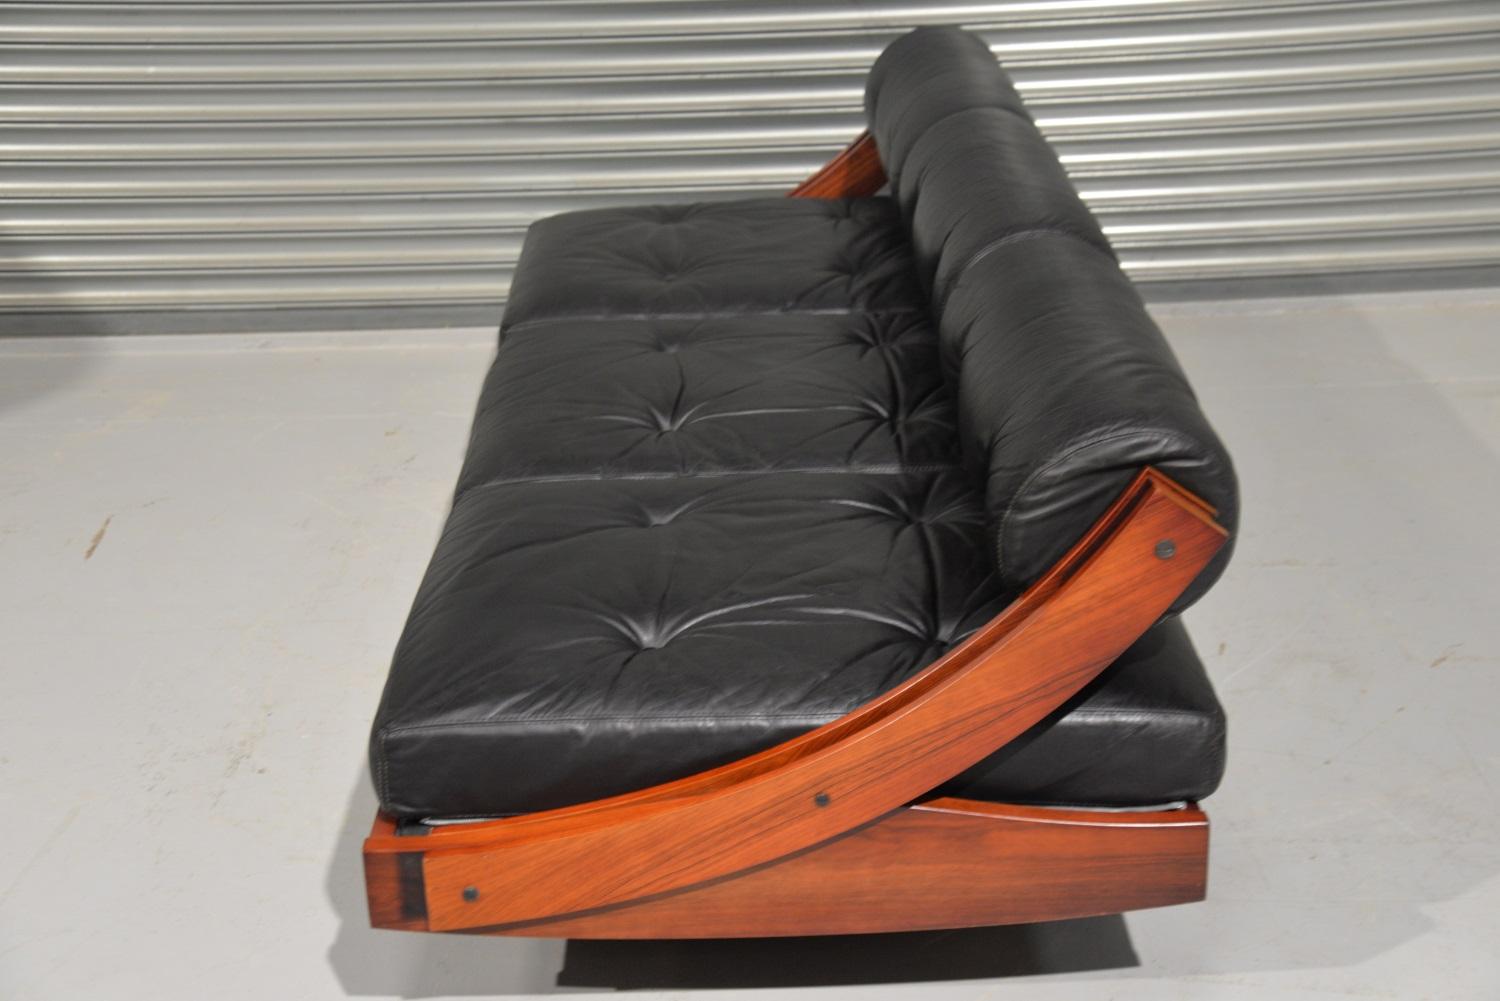 Gianni Songia GS195 Leather Daybed and Sofa for Sormani, Italy, 1963 (Italienisch) im Angebot